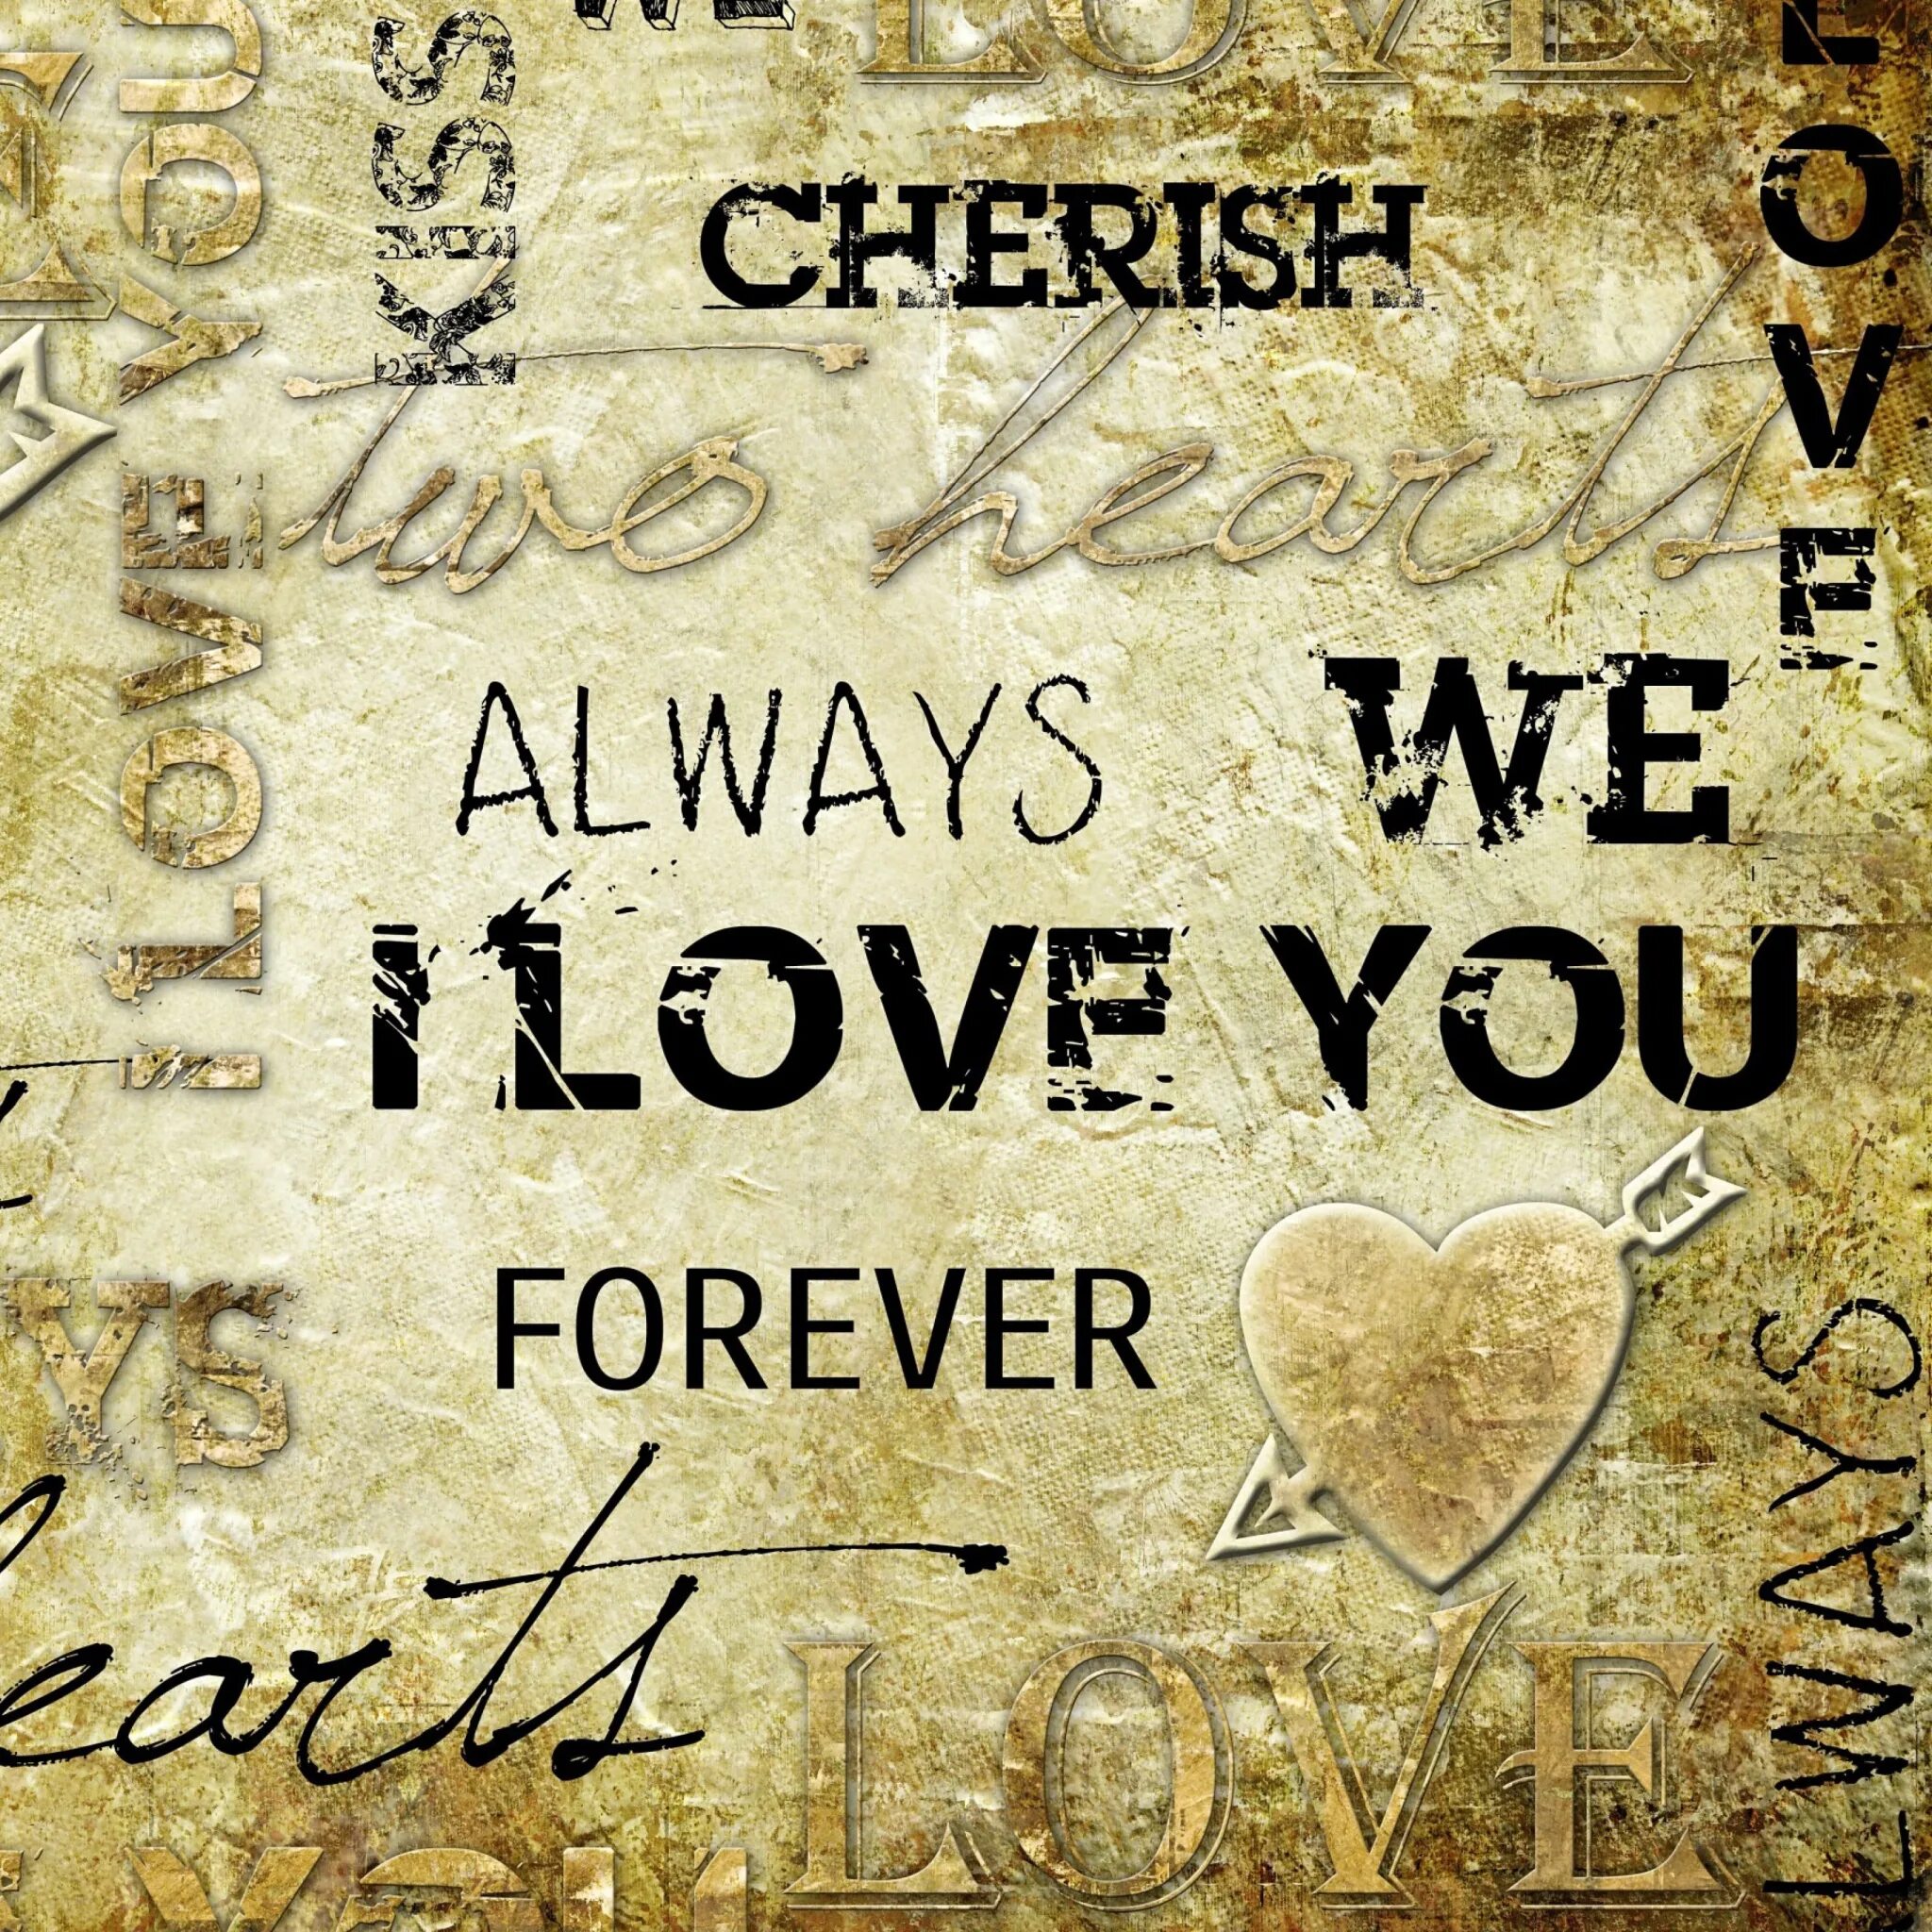 I Love you Forever картинки. Forever Loved. Обои на рабочий стол Love Forever. Love me Forever. Навсегда лов